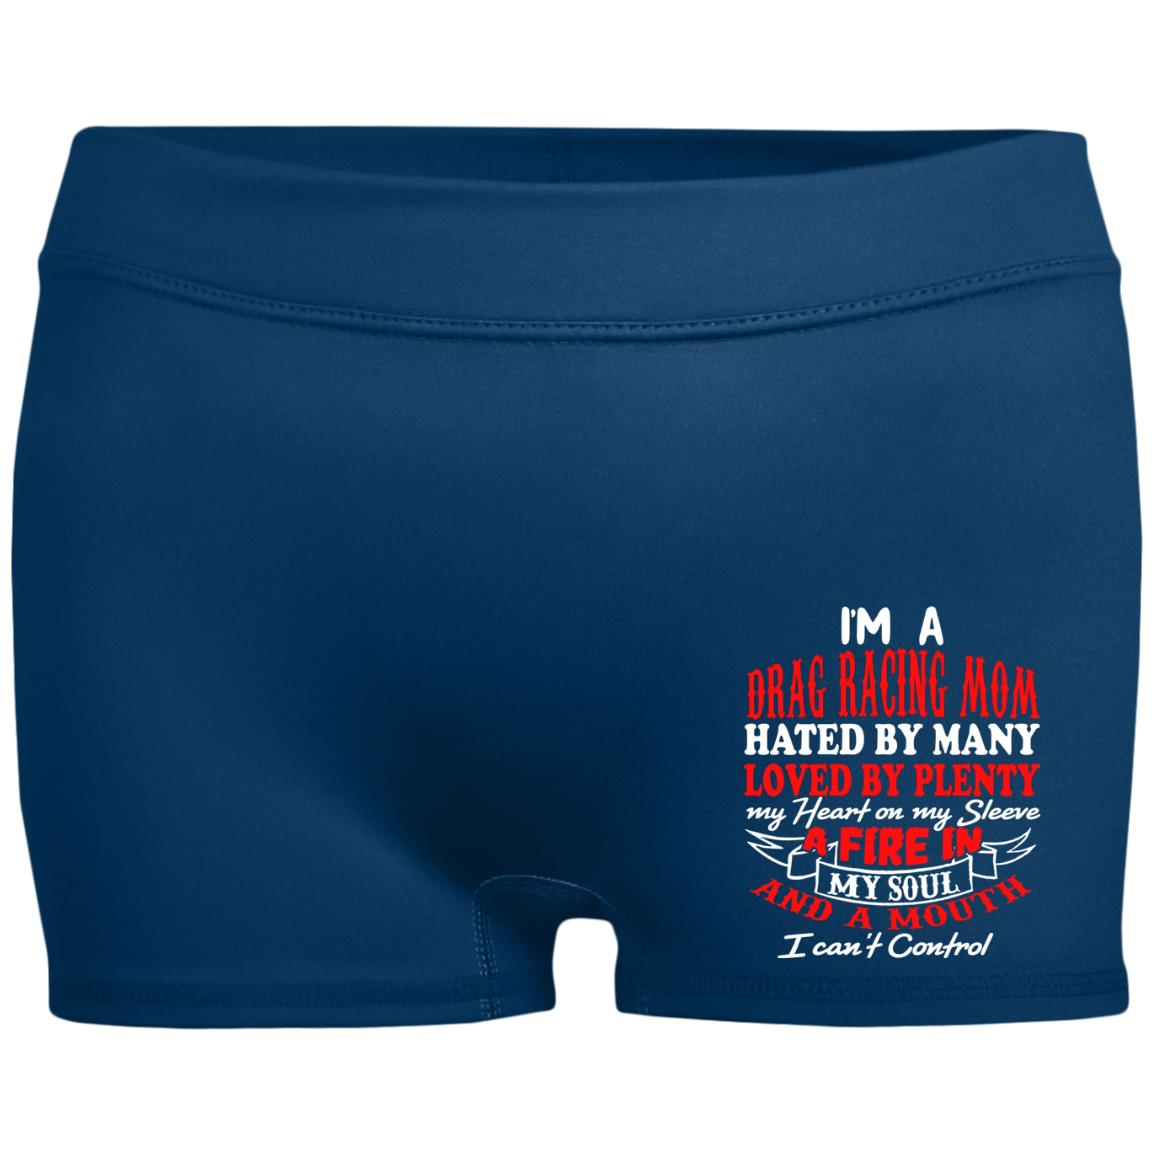 I'm A Drag Racing Mom Hated By Many Loved By Plenty Ladies' Fitted Moisture-Wicking 2.5 inch Inseam Shorts